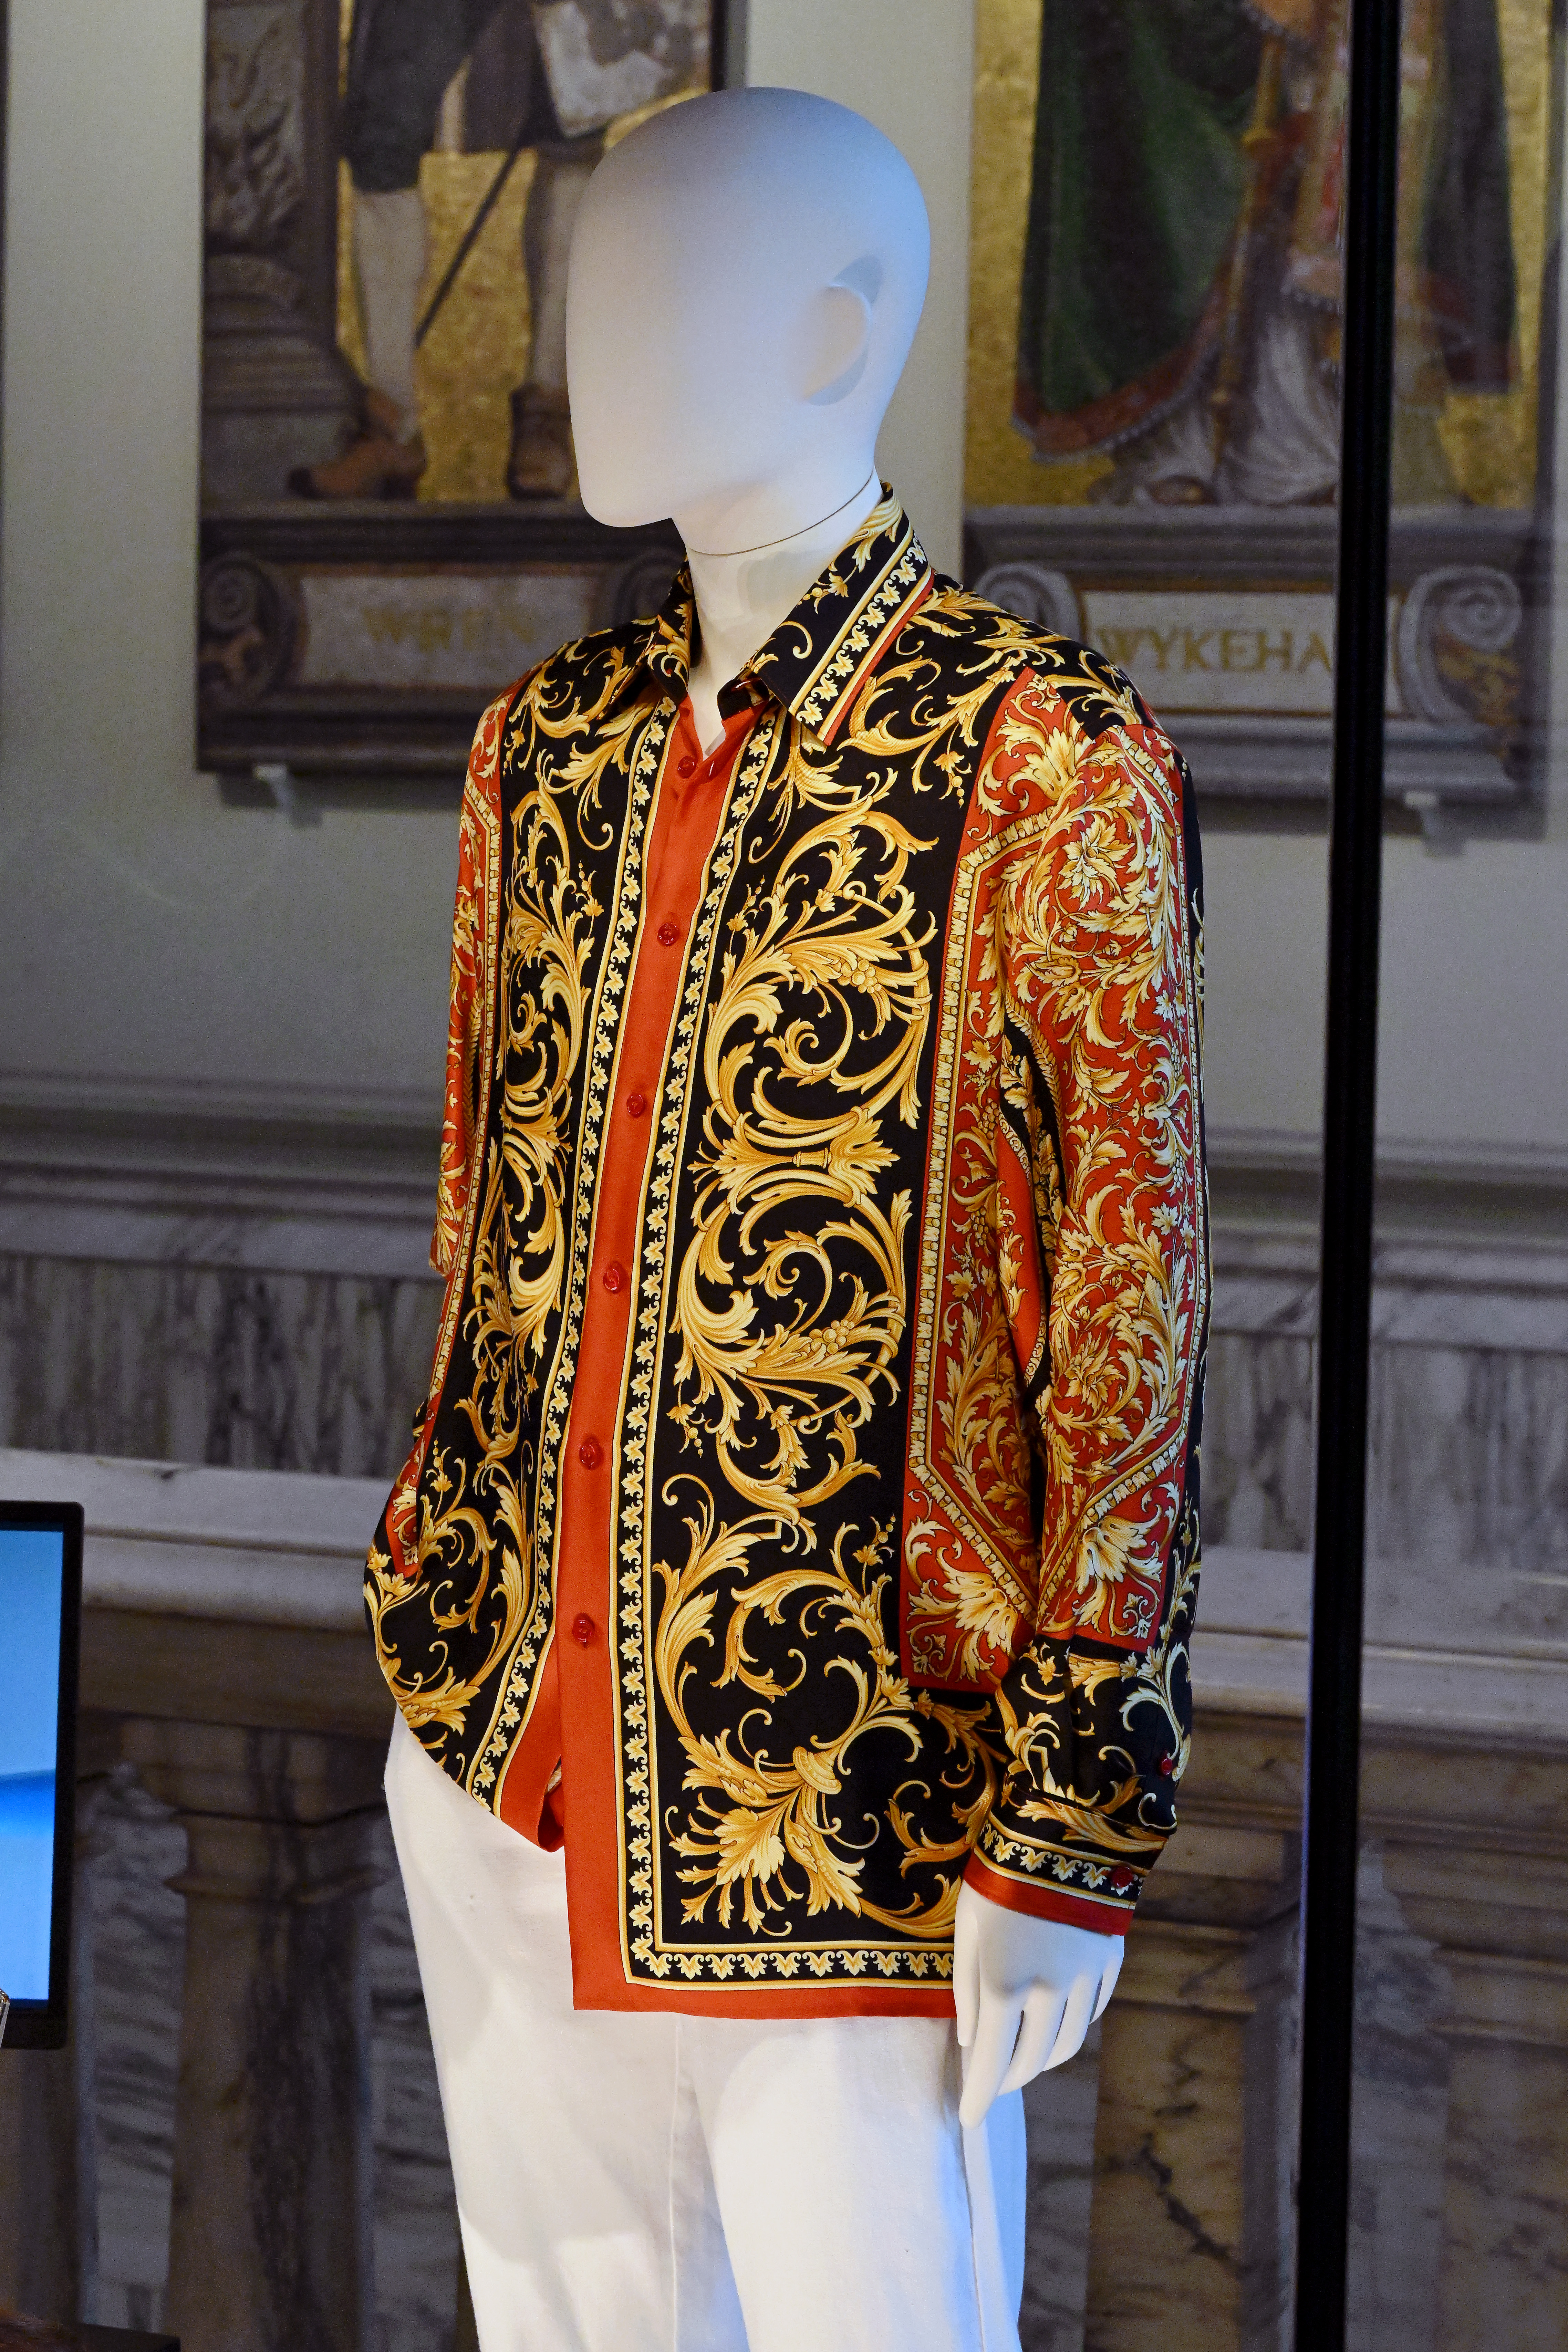 The shirt will also be showcased at the V&A